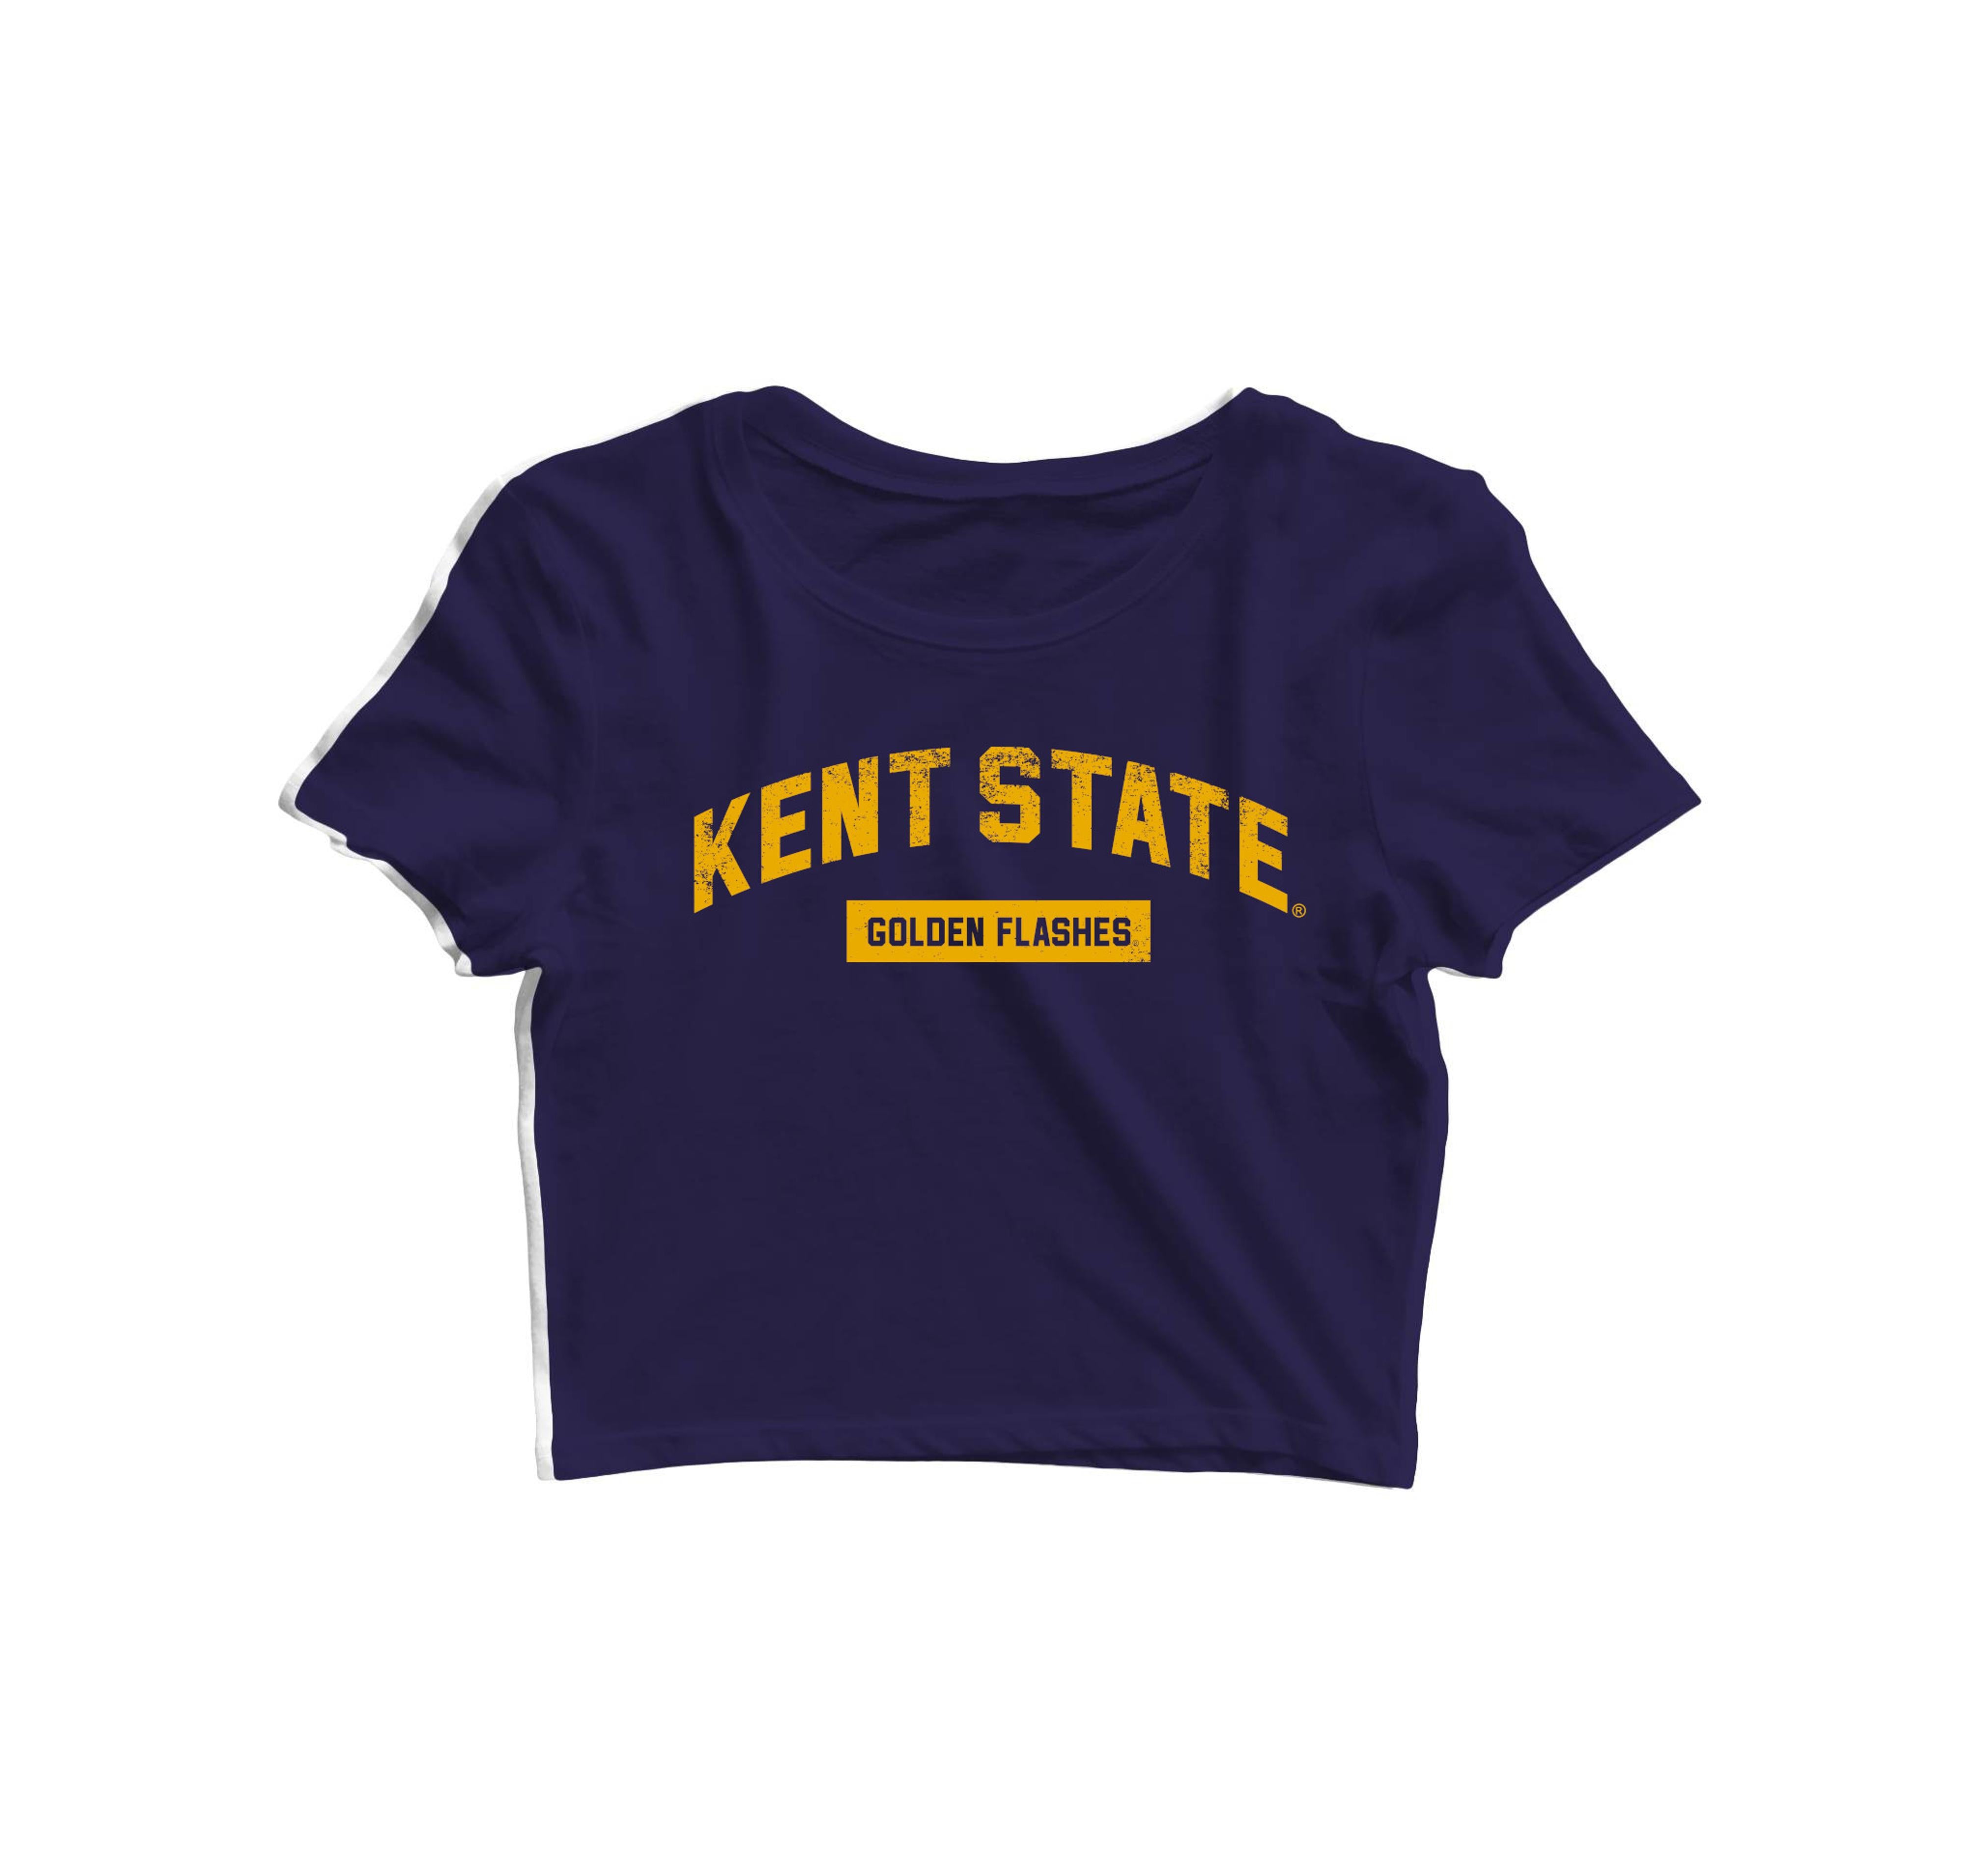 Kent State Over Golden Flashes Box